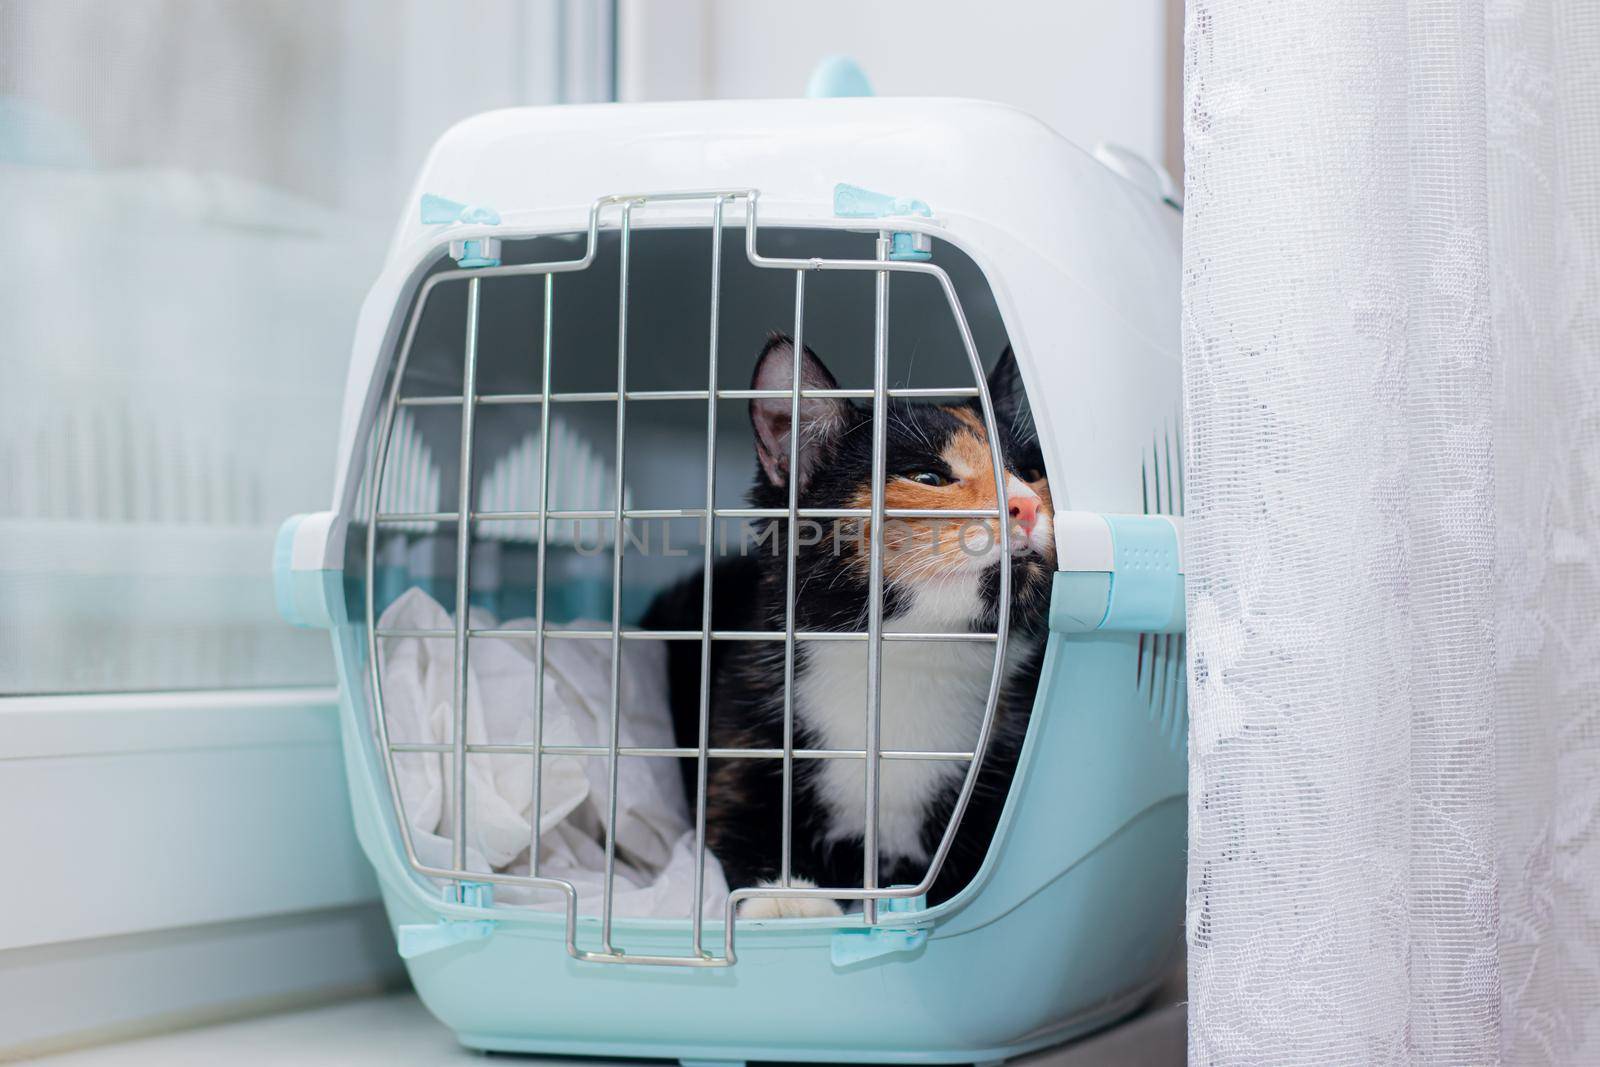 The cat sits in a carrier for animals . A pet. Transportation of animals. Article about animal transportation. Adult tortoiseshell cat. The safety of the pet